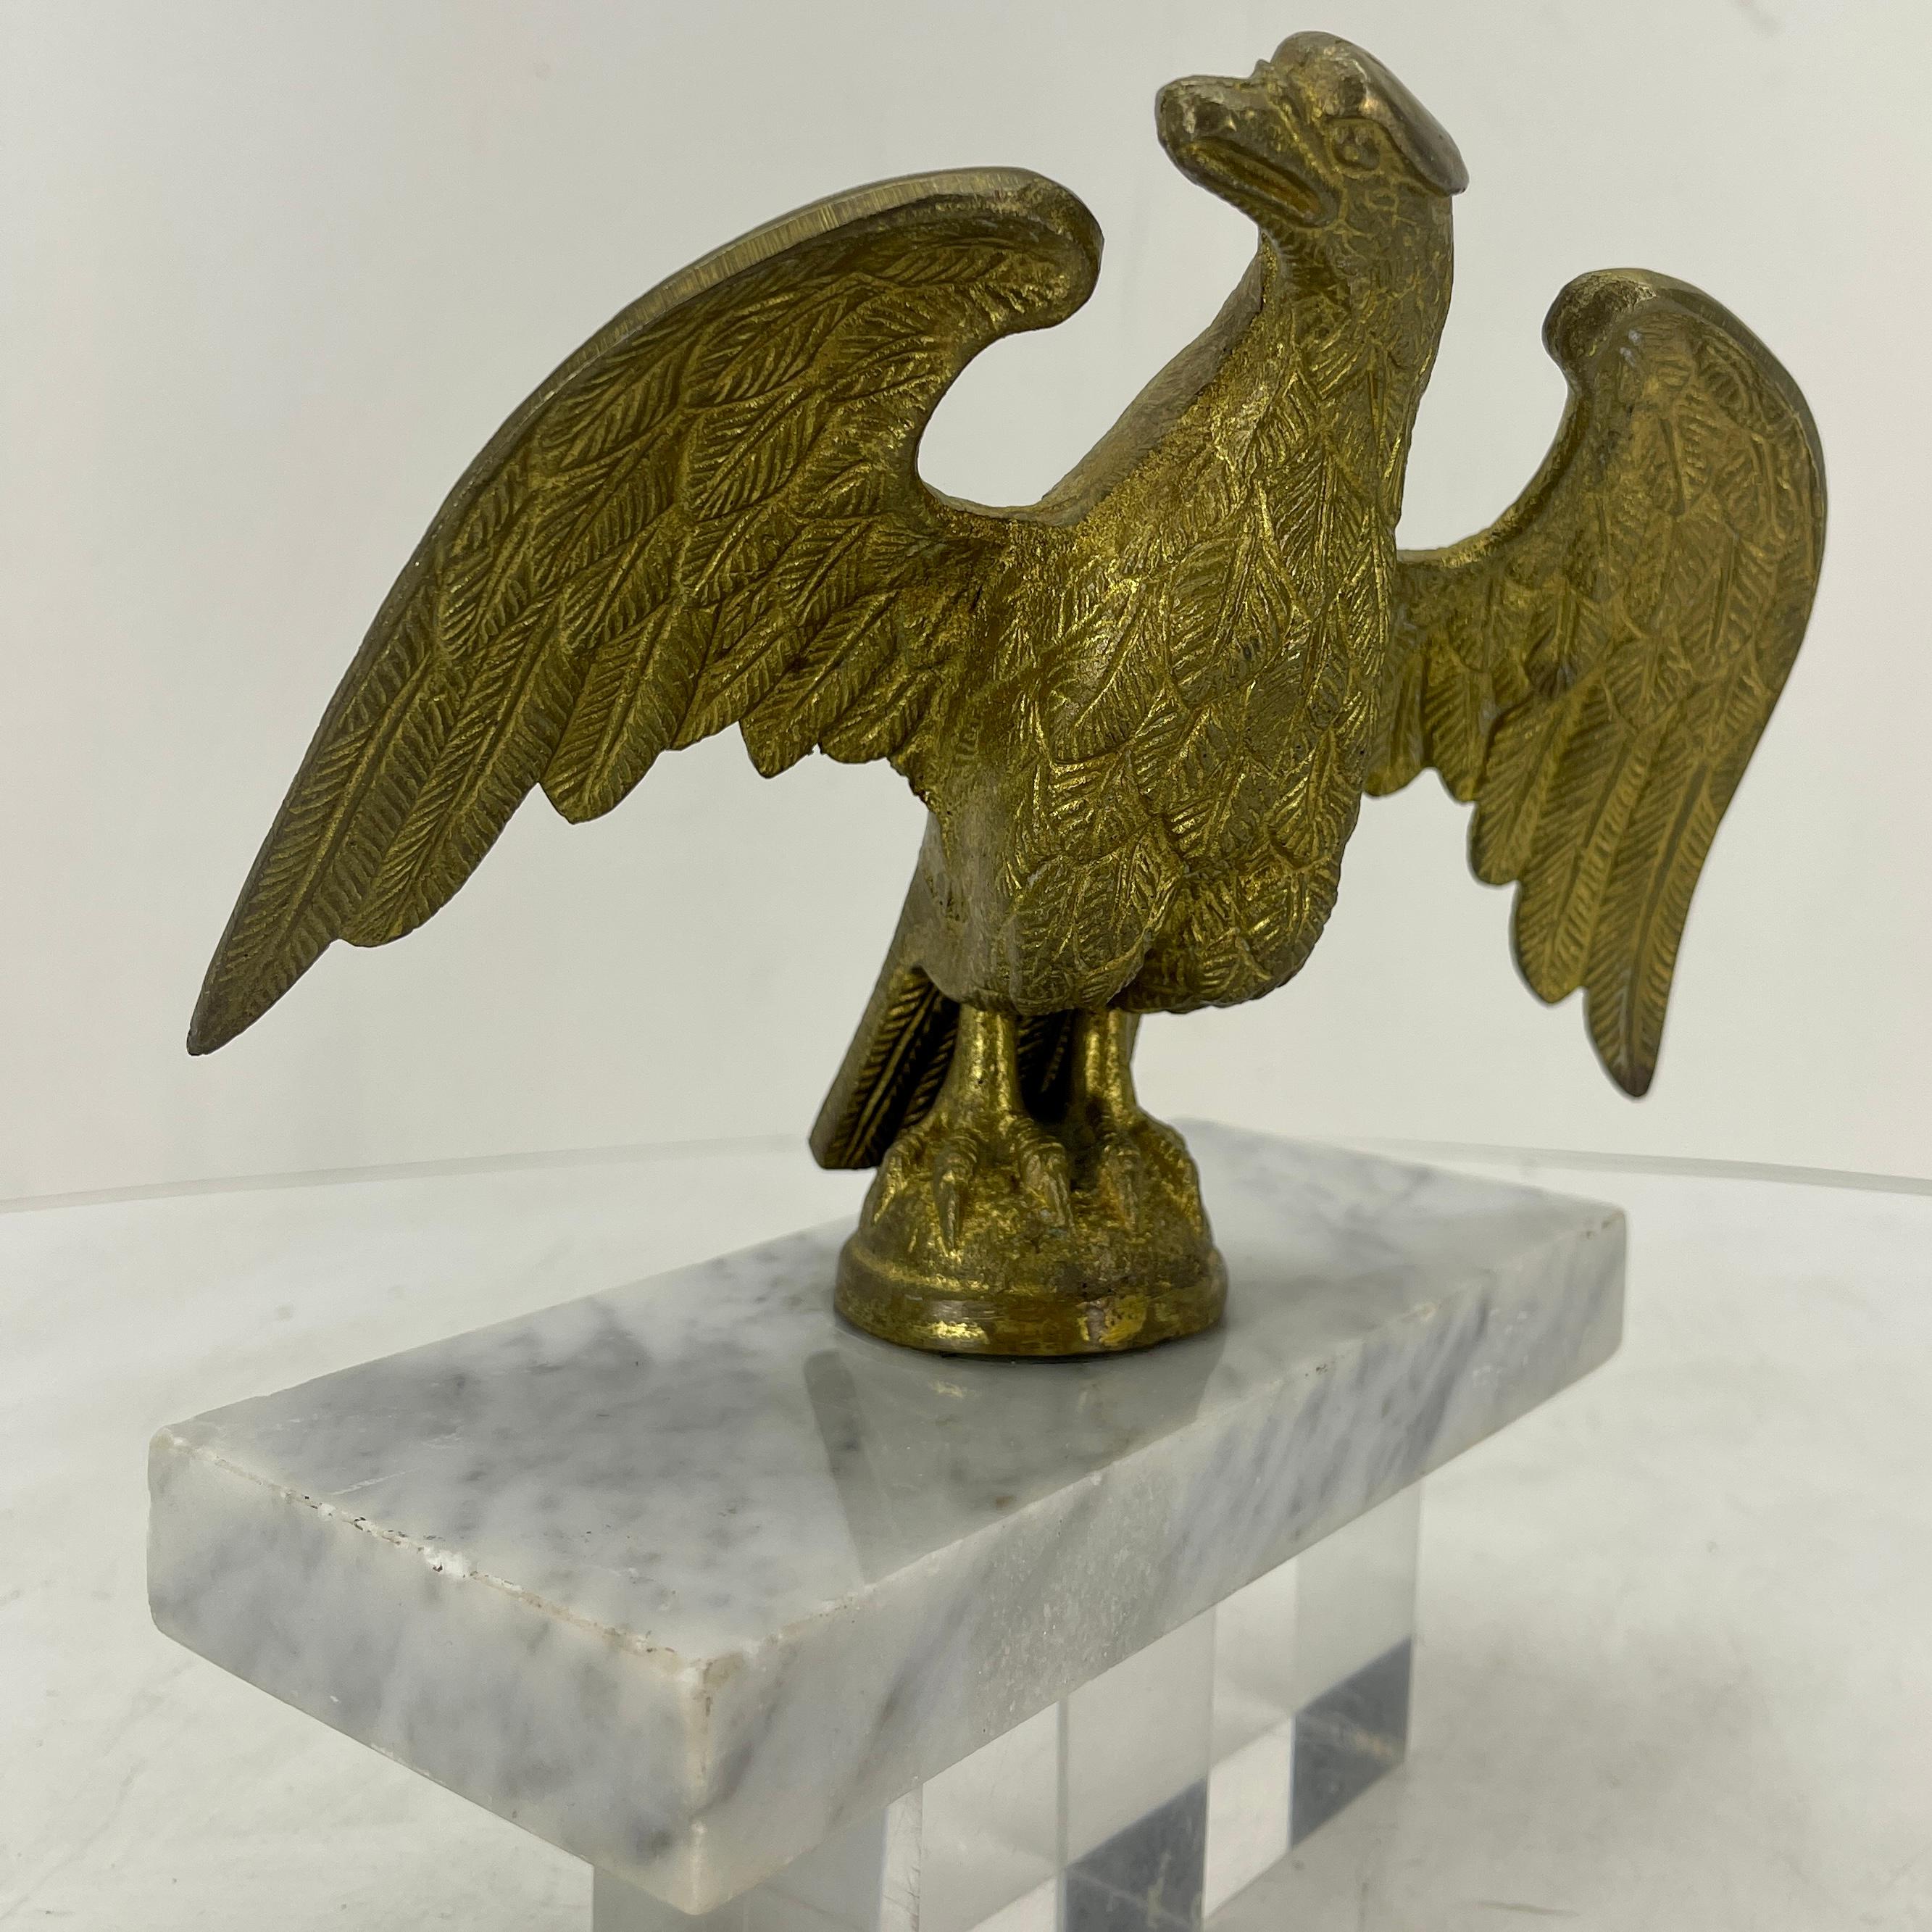 Italian gilt bronze sculpture of an eagle on a rectangular white Carrera piece of marble. The high quality of the gilt work and the early age makes the eagle sculpture stand out.
